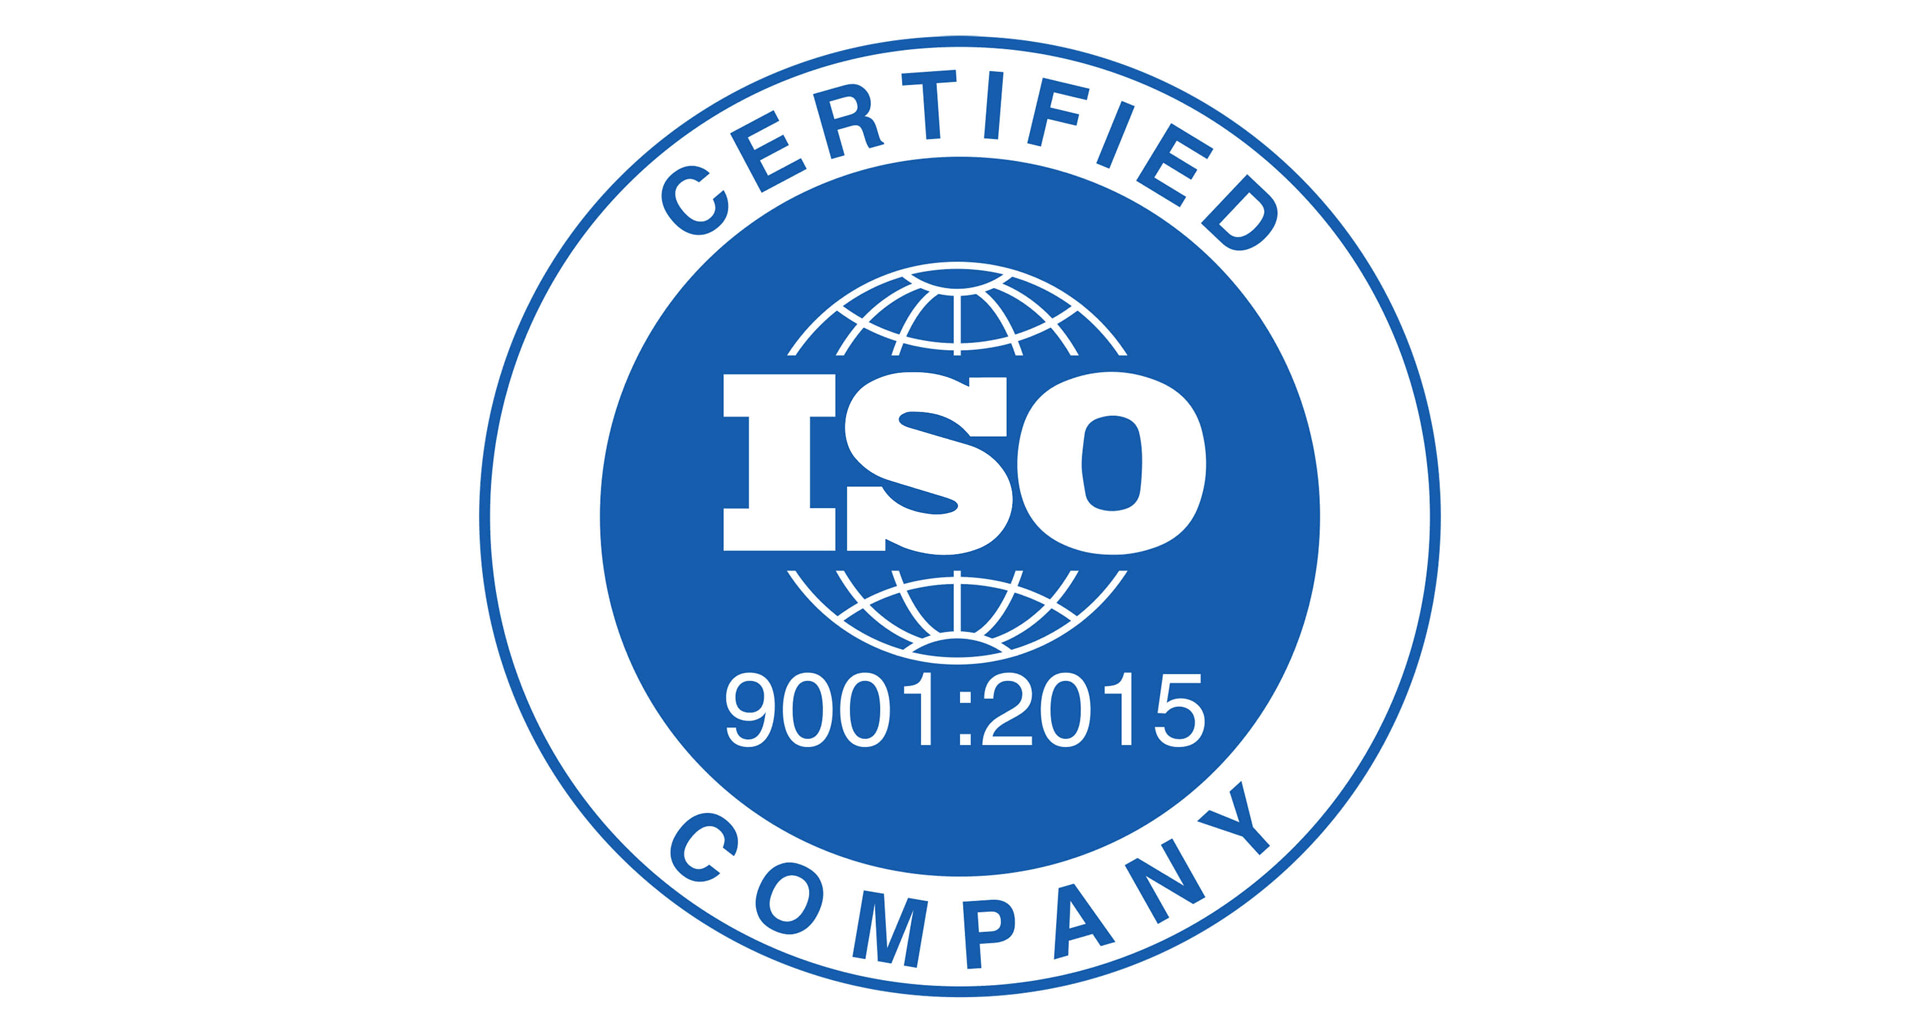 The company has been recognized as compliant with the requirements of the international standard ISO 9001:2015.